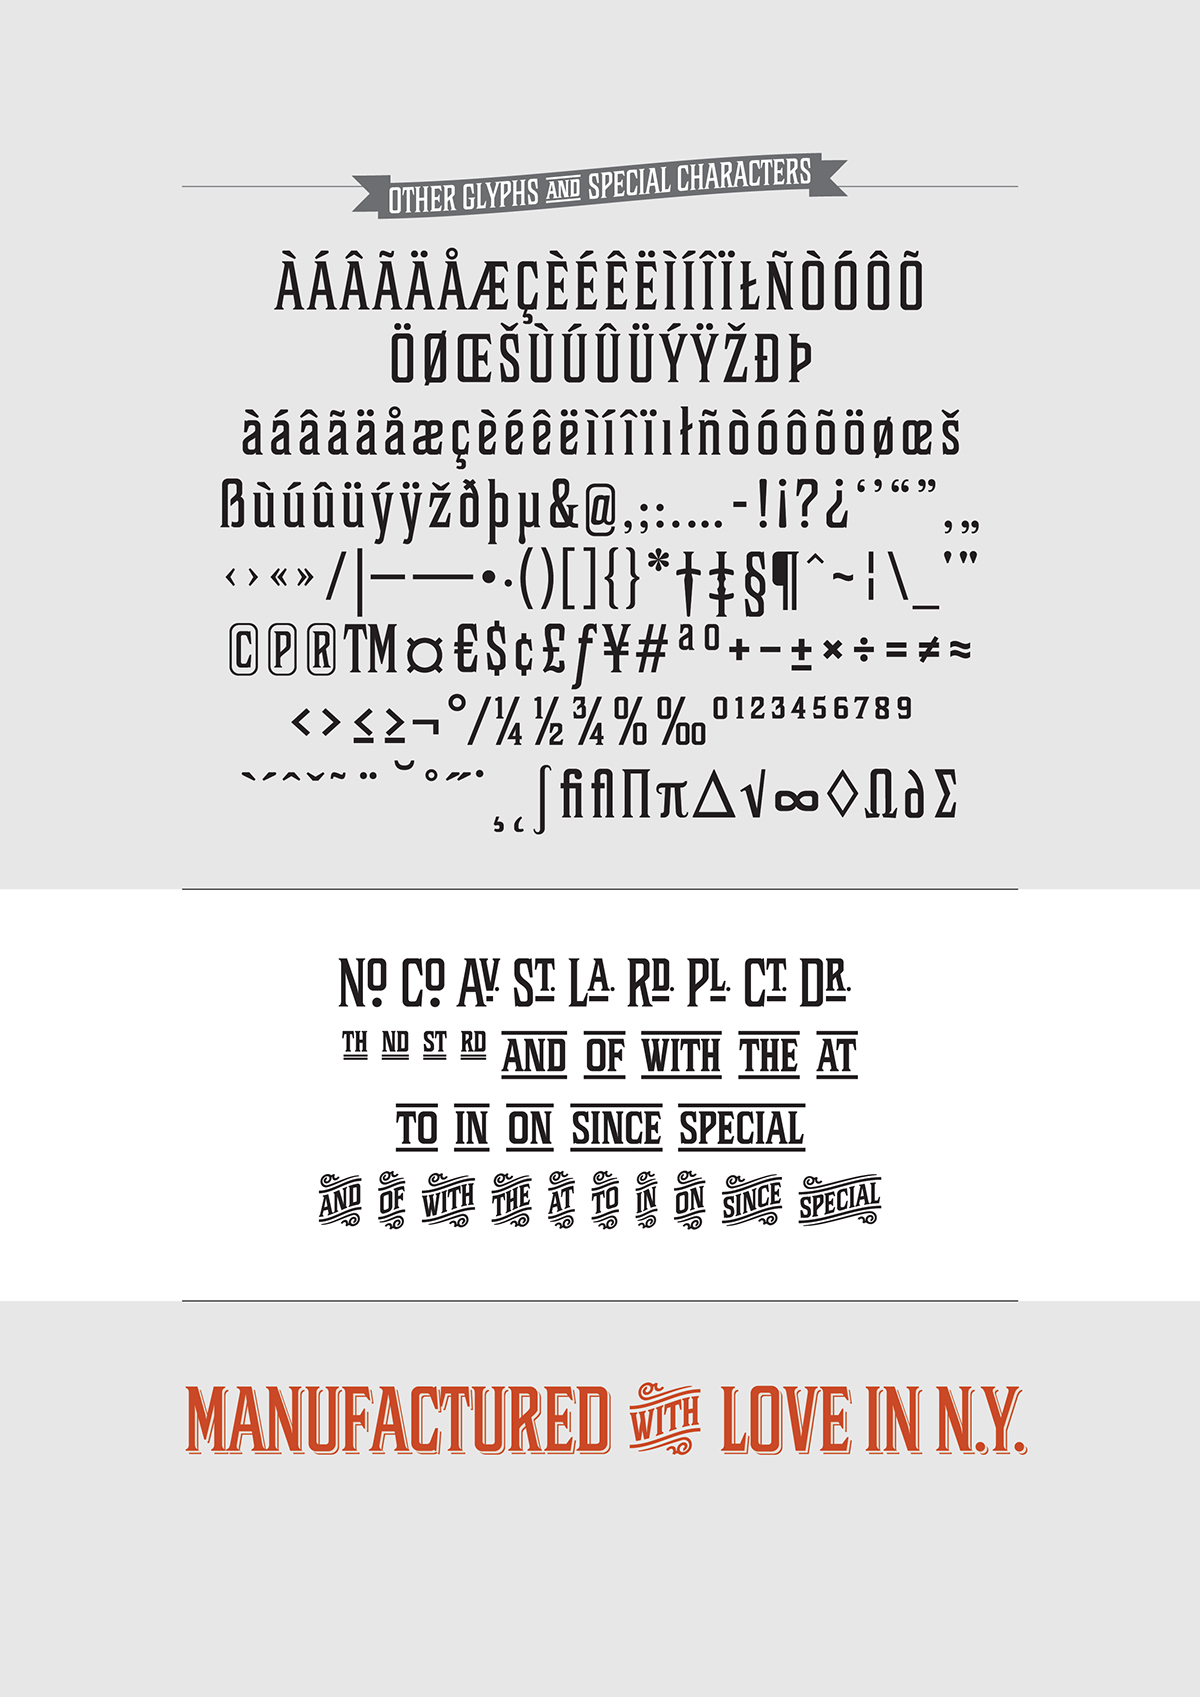 bowery vintage Storefront menuboard Display Typeface displayface turn of century New York Bjorn Ramberg lederhosen late 1800's early 1900's extra glyphs Special characters